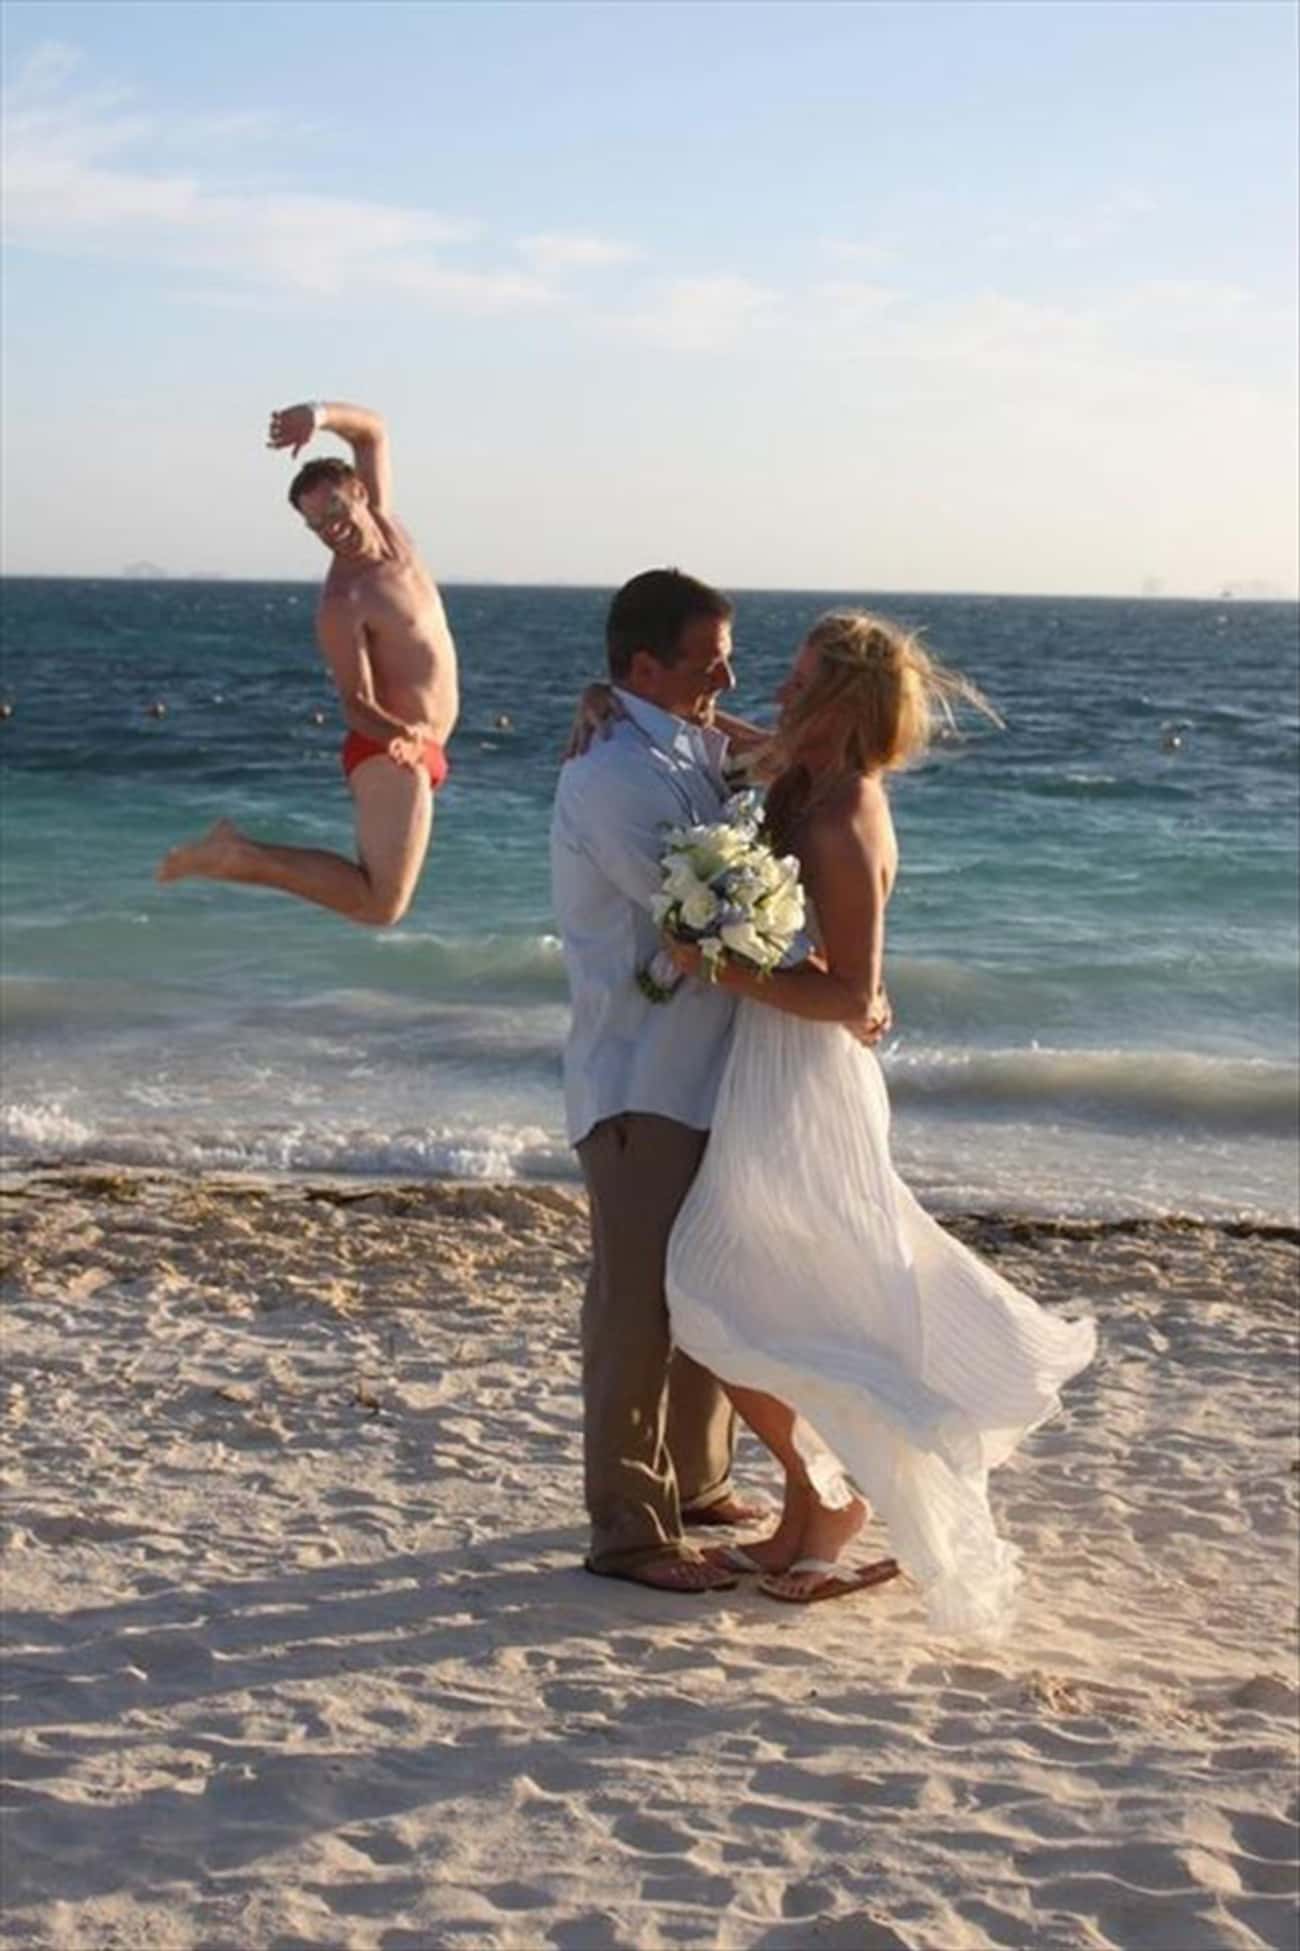 The Dangers of a Seaside Ceremony